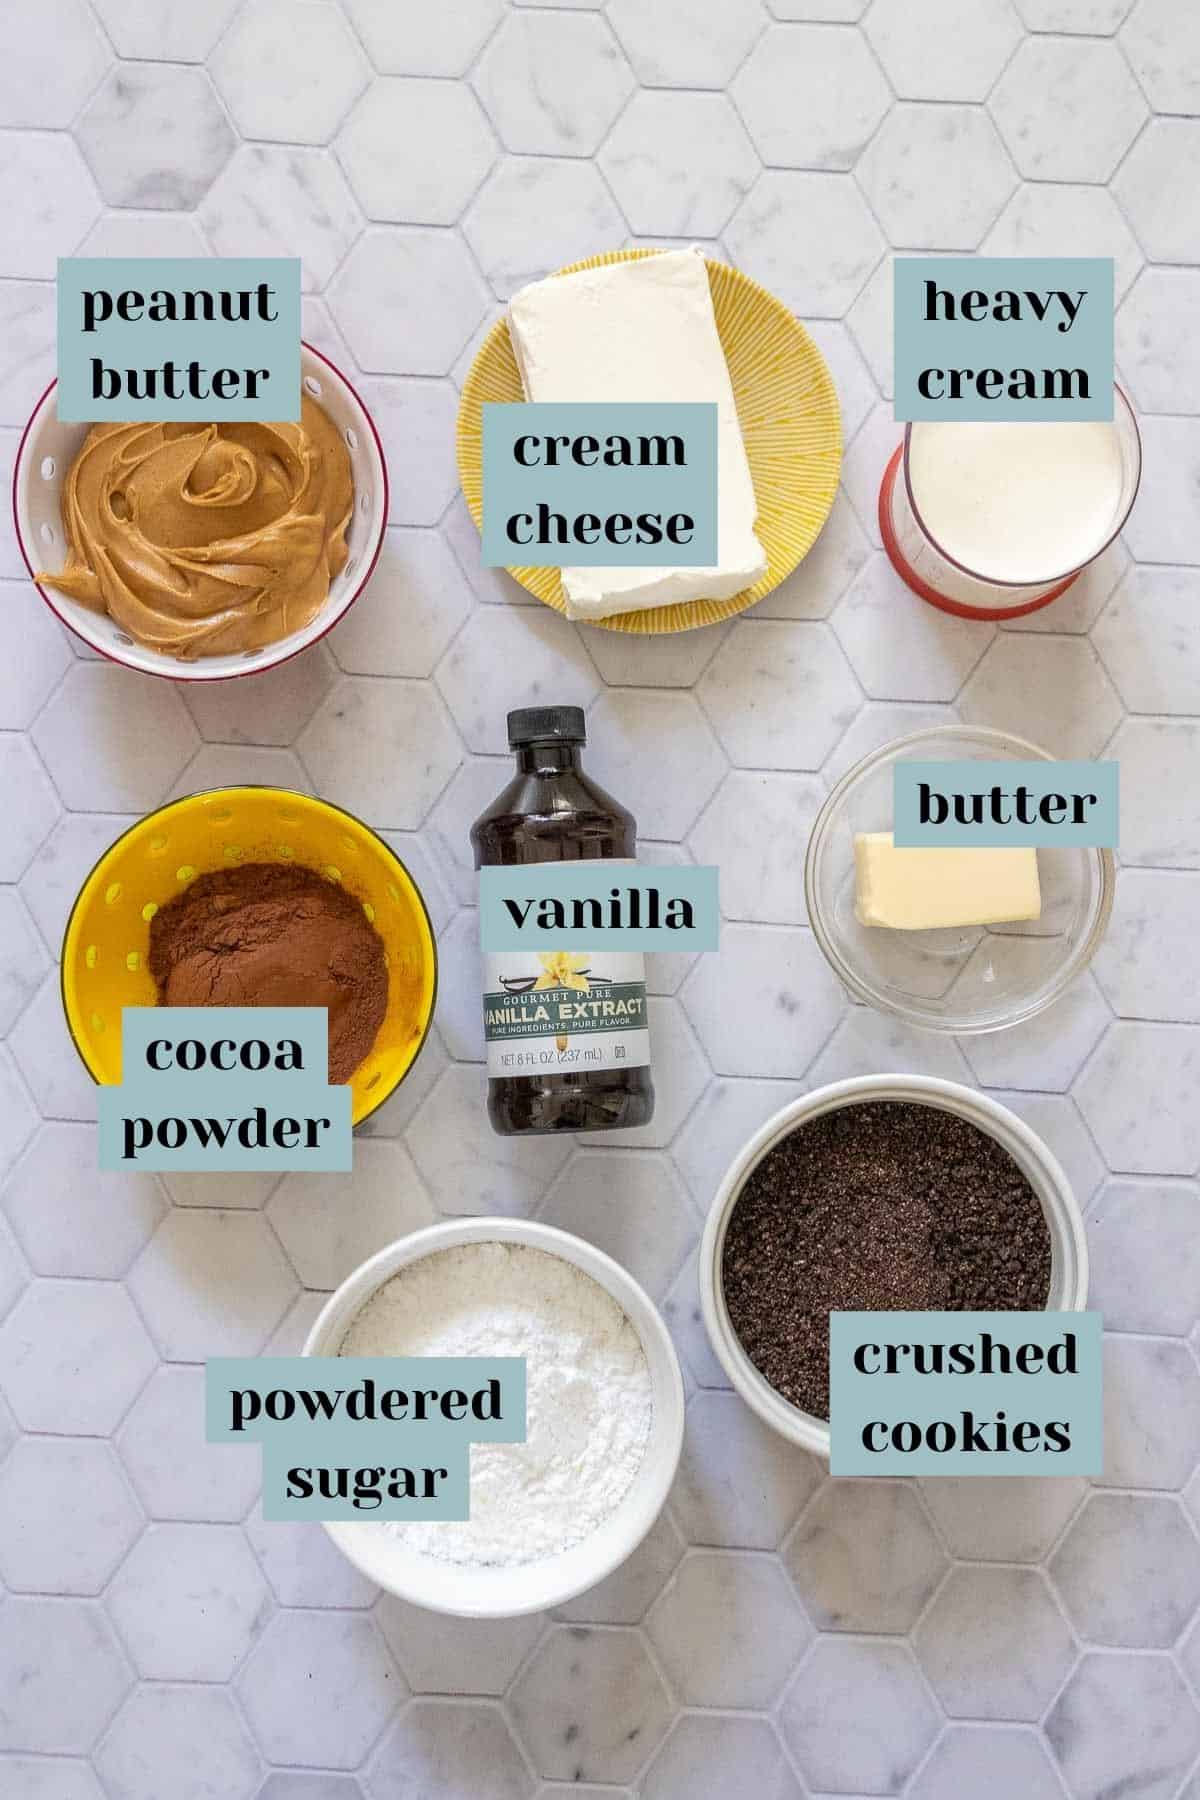 Ingredients for chocolate peanut butter pie on a tile surface with labels.